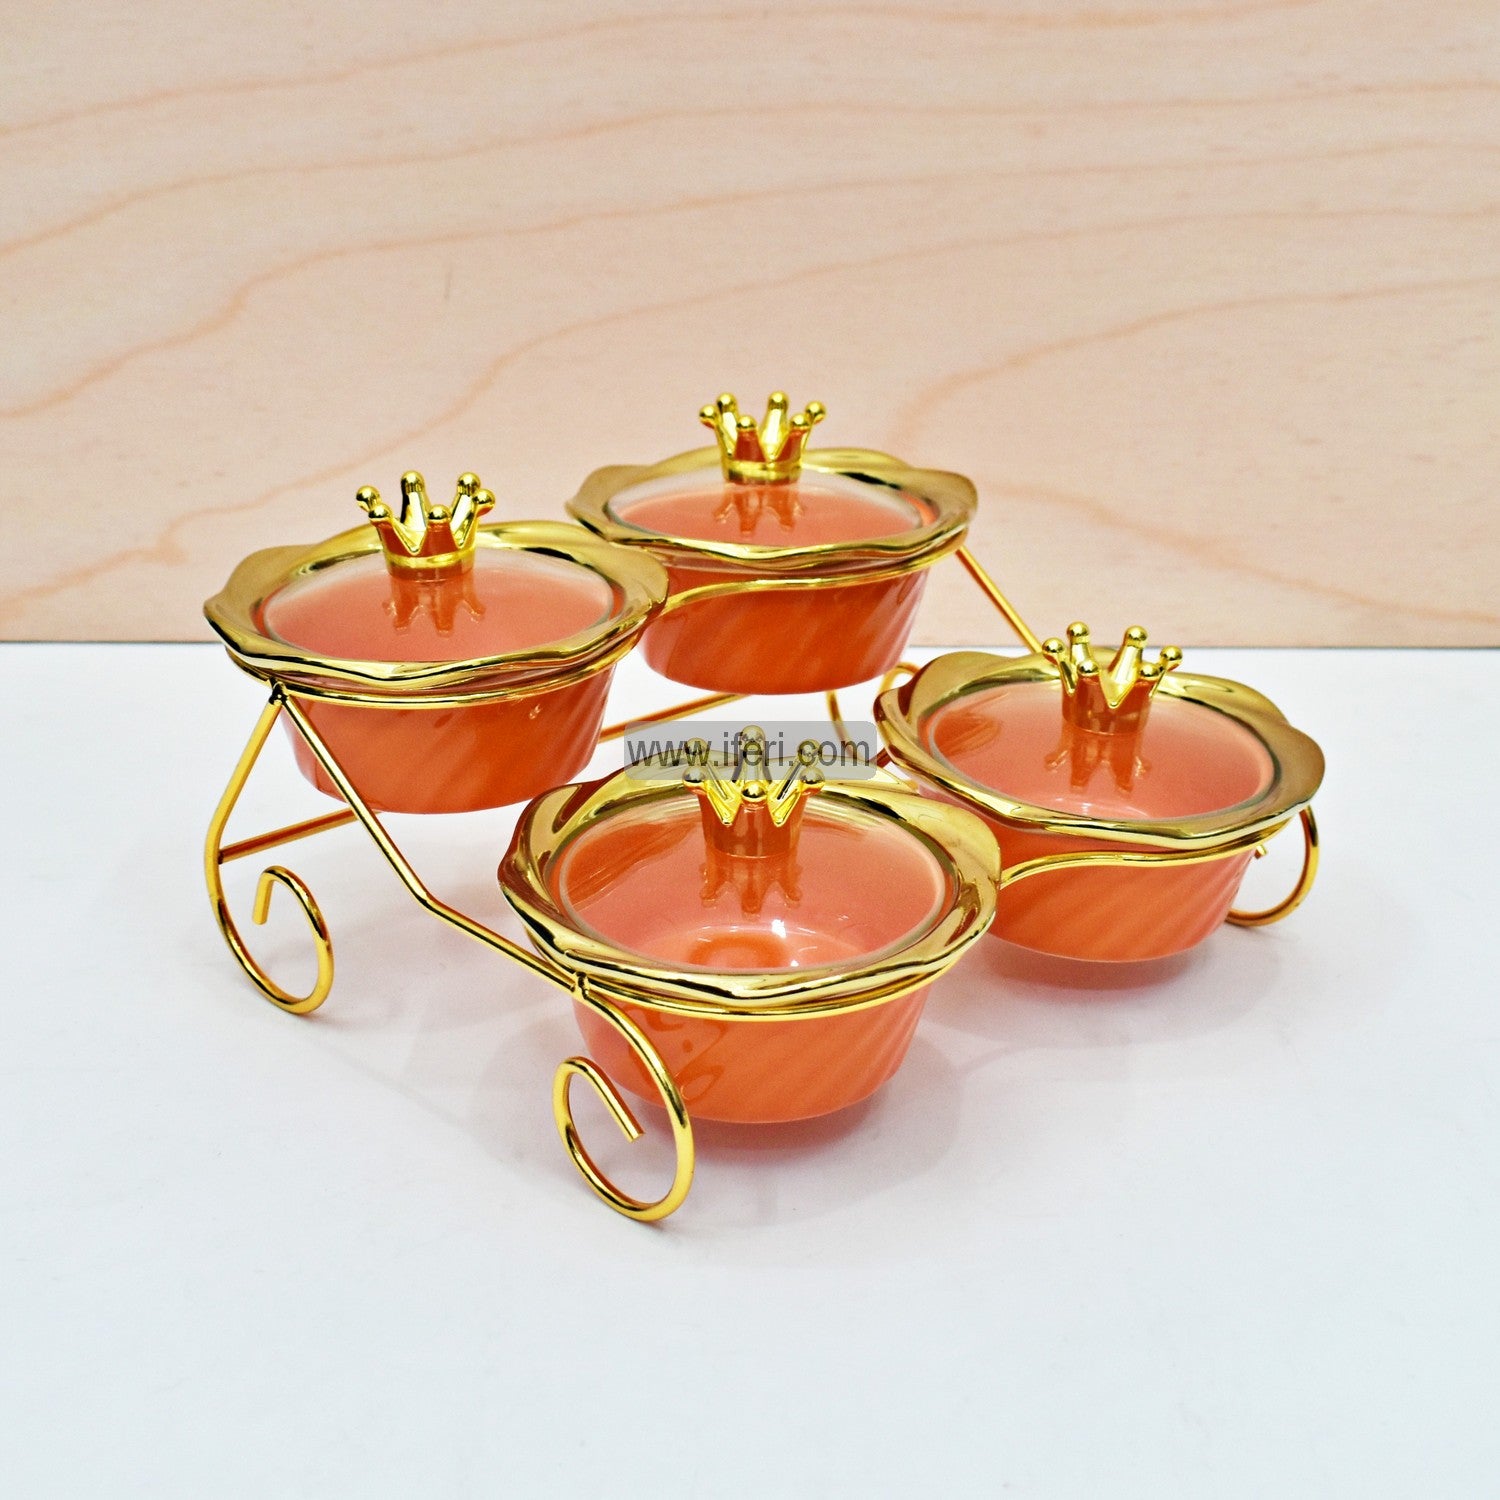 4 Pcs Ceramic Dried Fruit, Candy, Dessert Serving Bowl with Stand FH2161